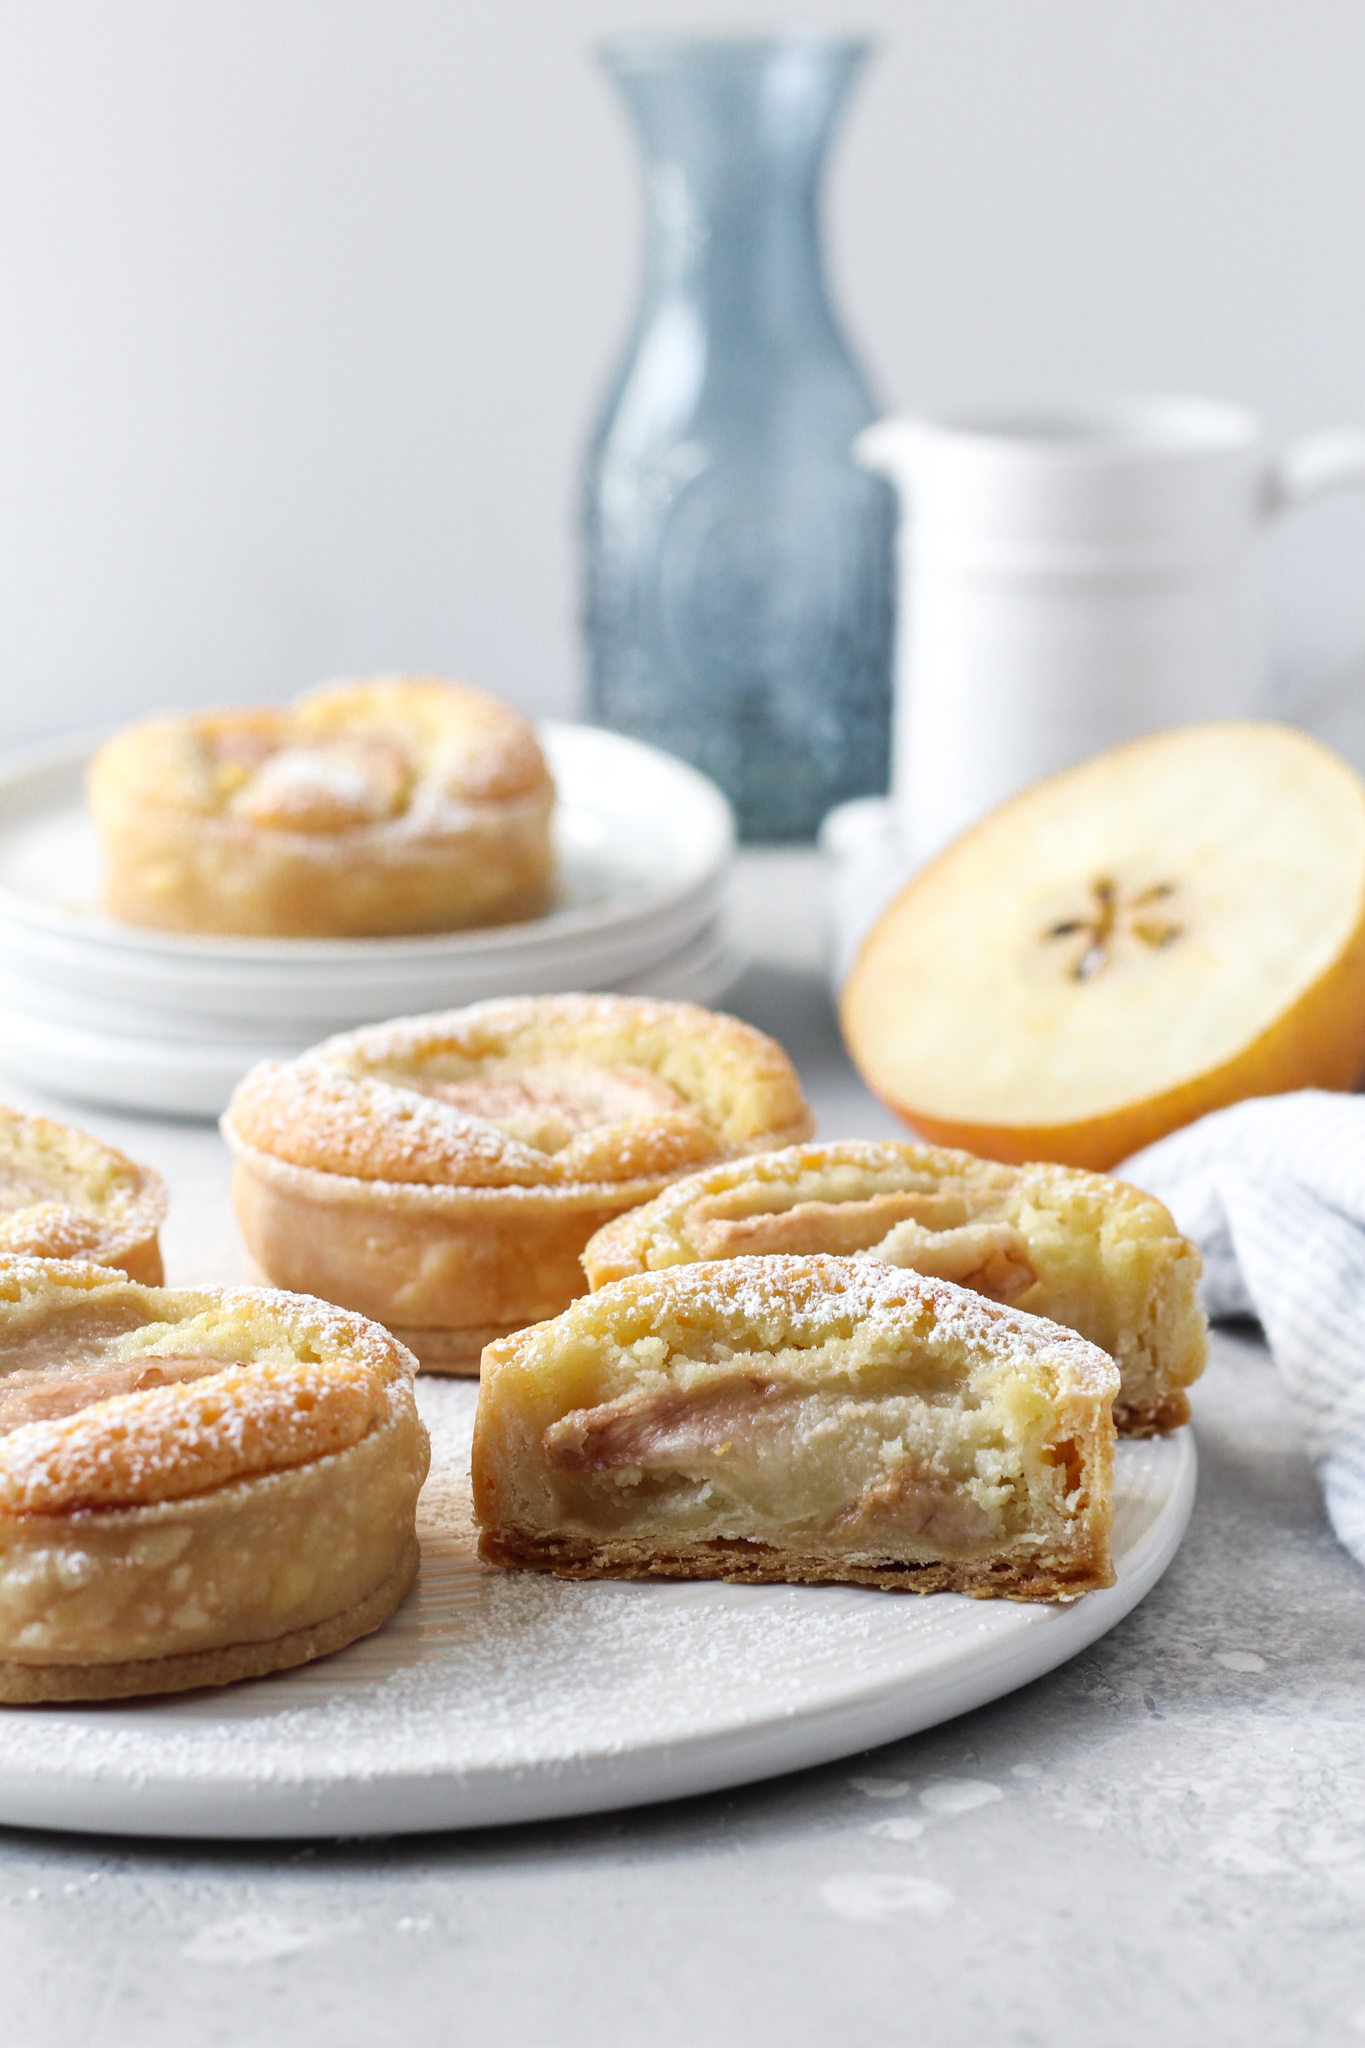 Plate of four individual Asia pear tars with a almond cream filling and one tart sliced in half displaying filling.